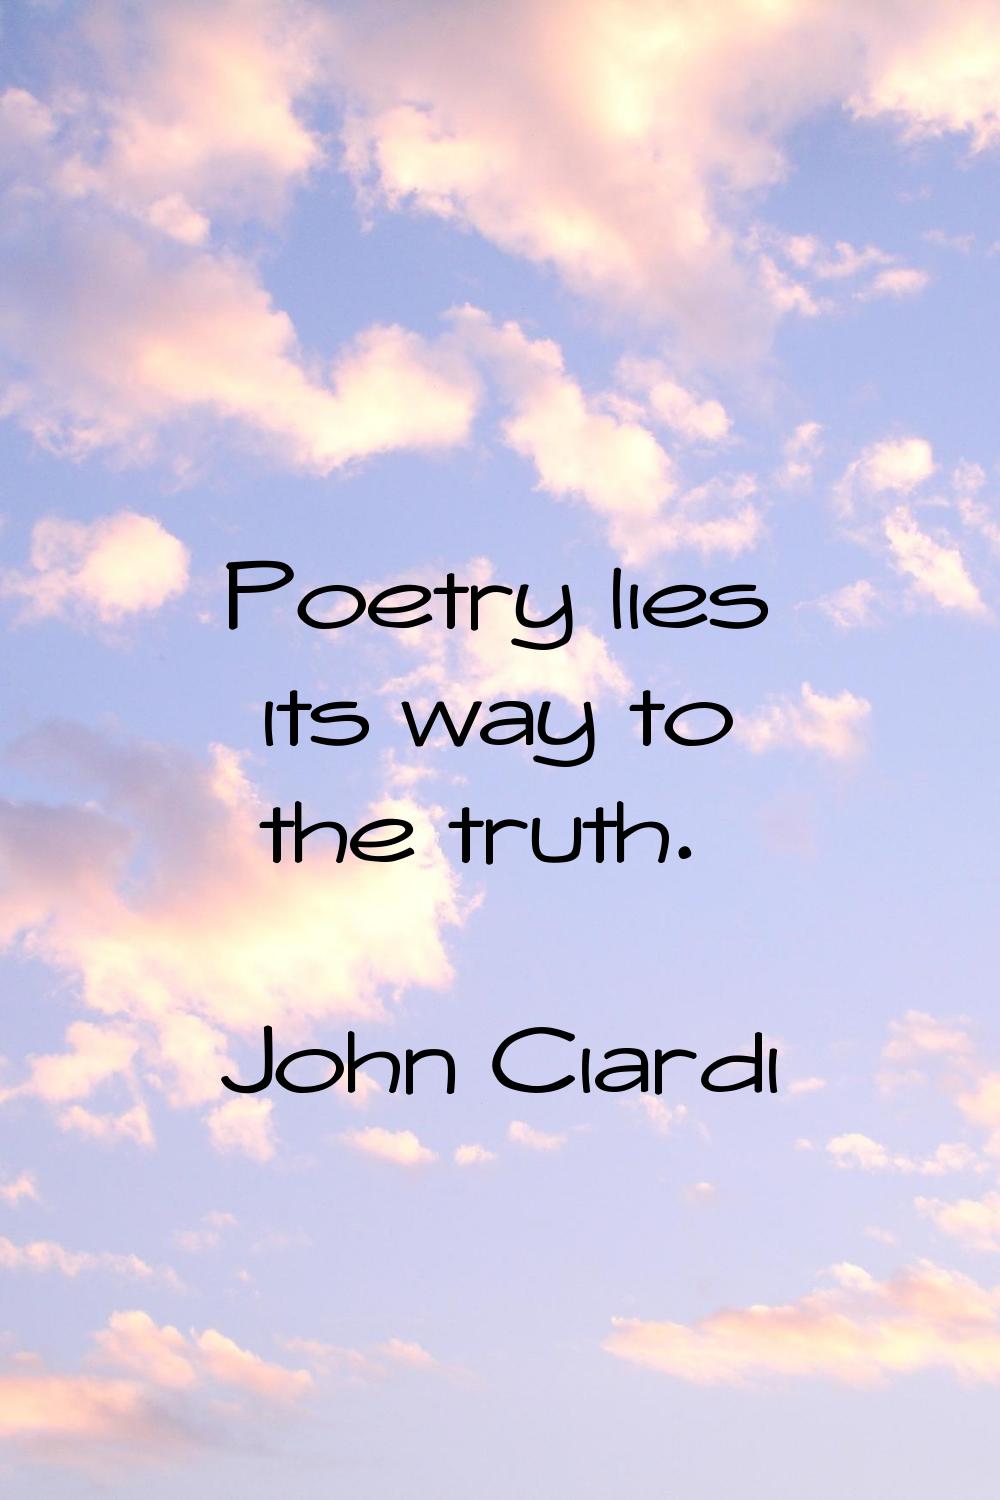 Poetry lies its way to the truth.